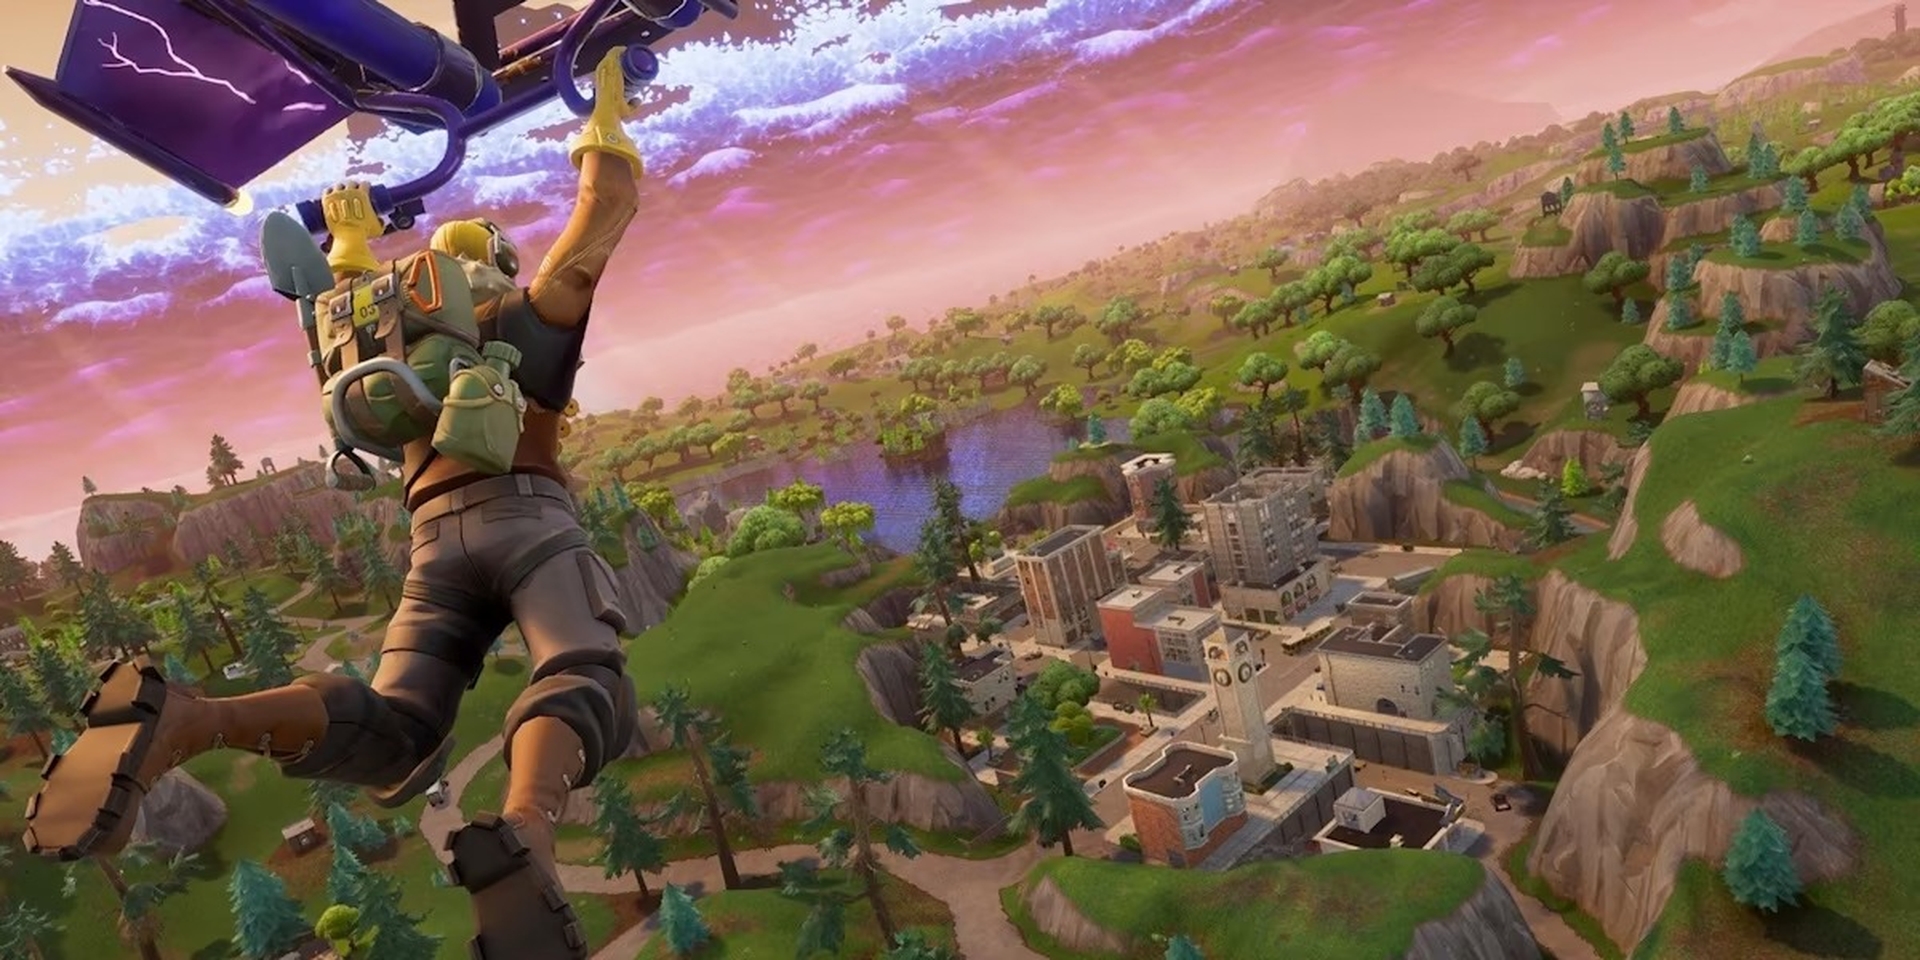 In this article, we are going to go over where to find Light Machine Gun Fortnite, so you can play with this unvaulted weapon and obliterate your opponents.